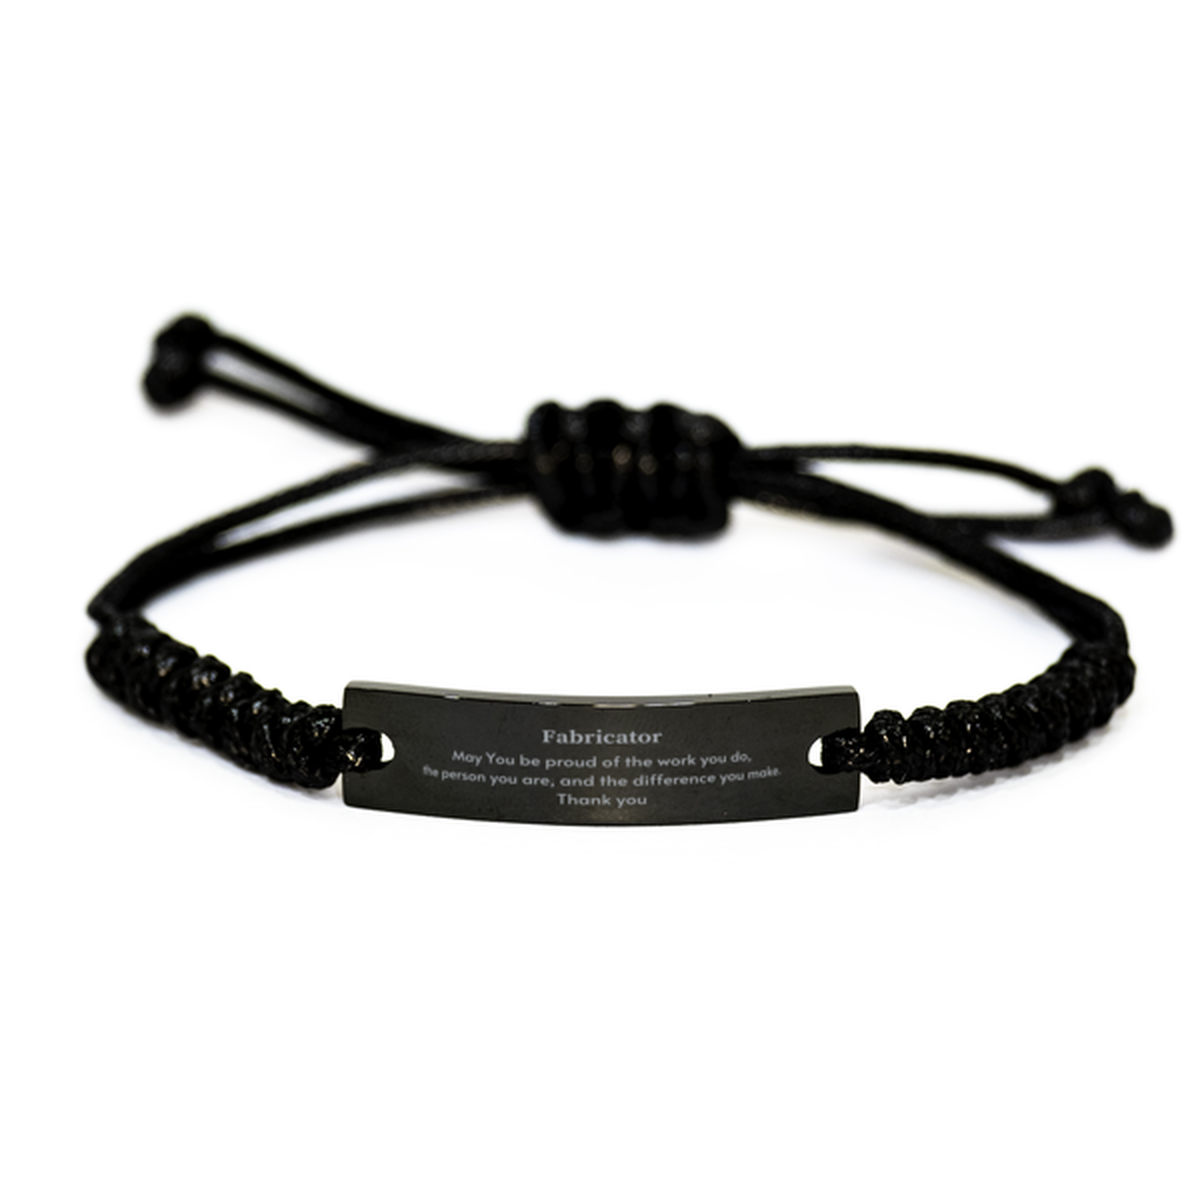 Heartwarming Black Rope Bracelet Retirement Coworkers Gifts for Fabricator, Fabricator May You be proud of the work you do, the person you are Gifts for Boss Men Women Friends